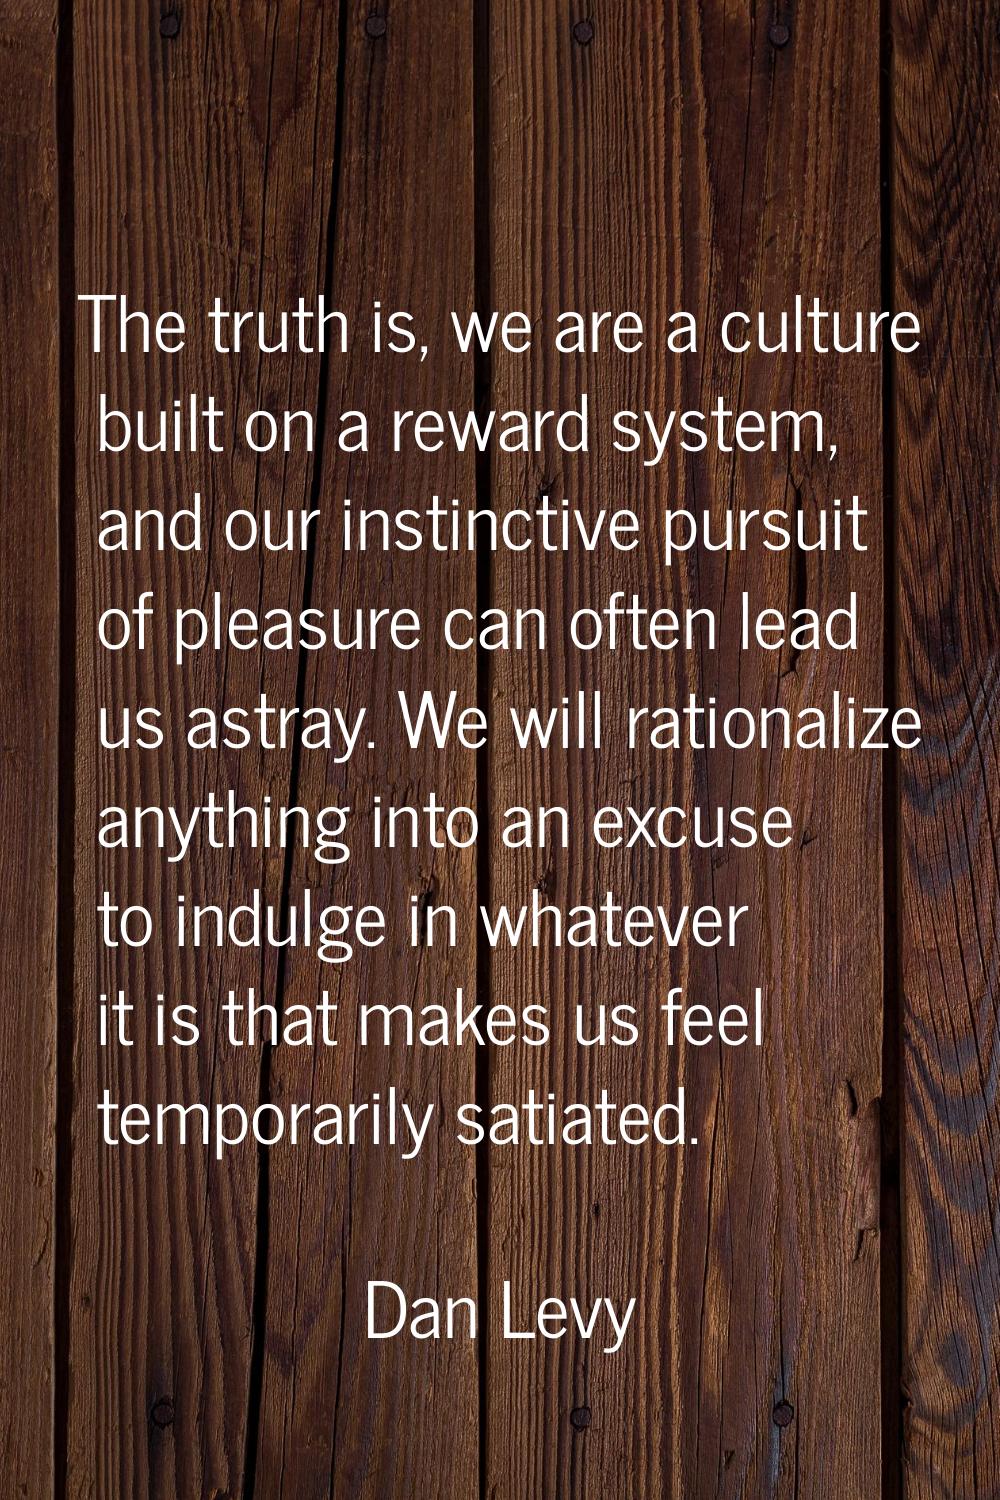 The truth is, we are a culture built on a reward system, and our instinctive pursuit of pleasure ca